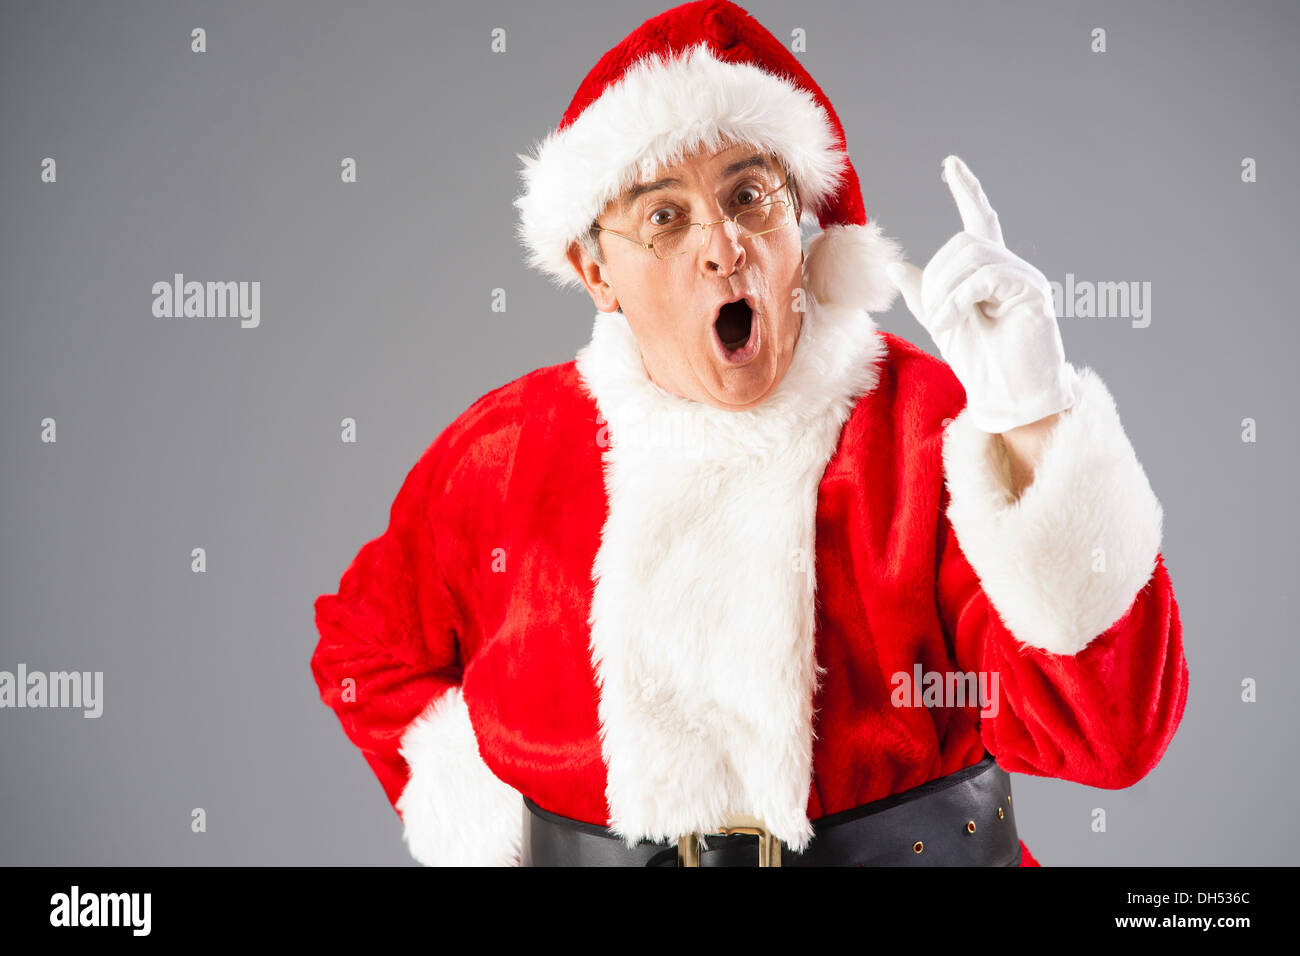 Santa Claus Wagging His Index Finger Stock Photo Alamy